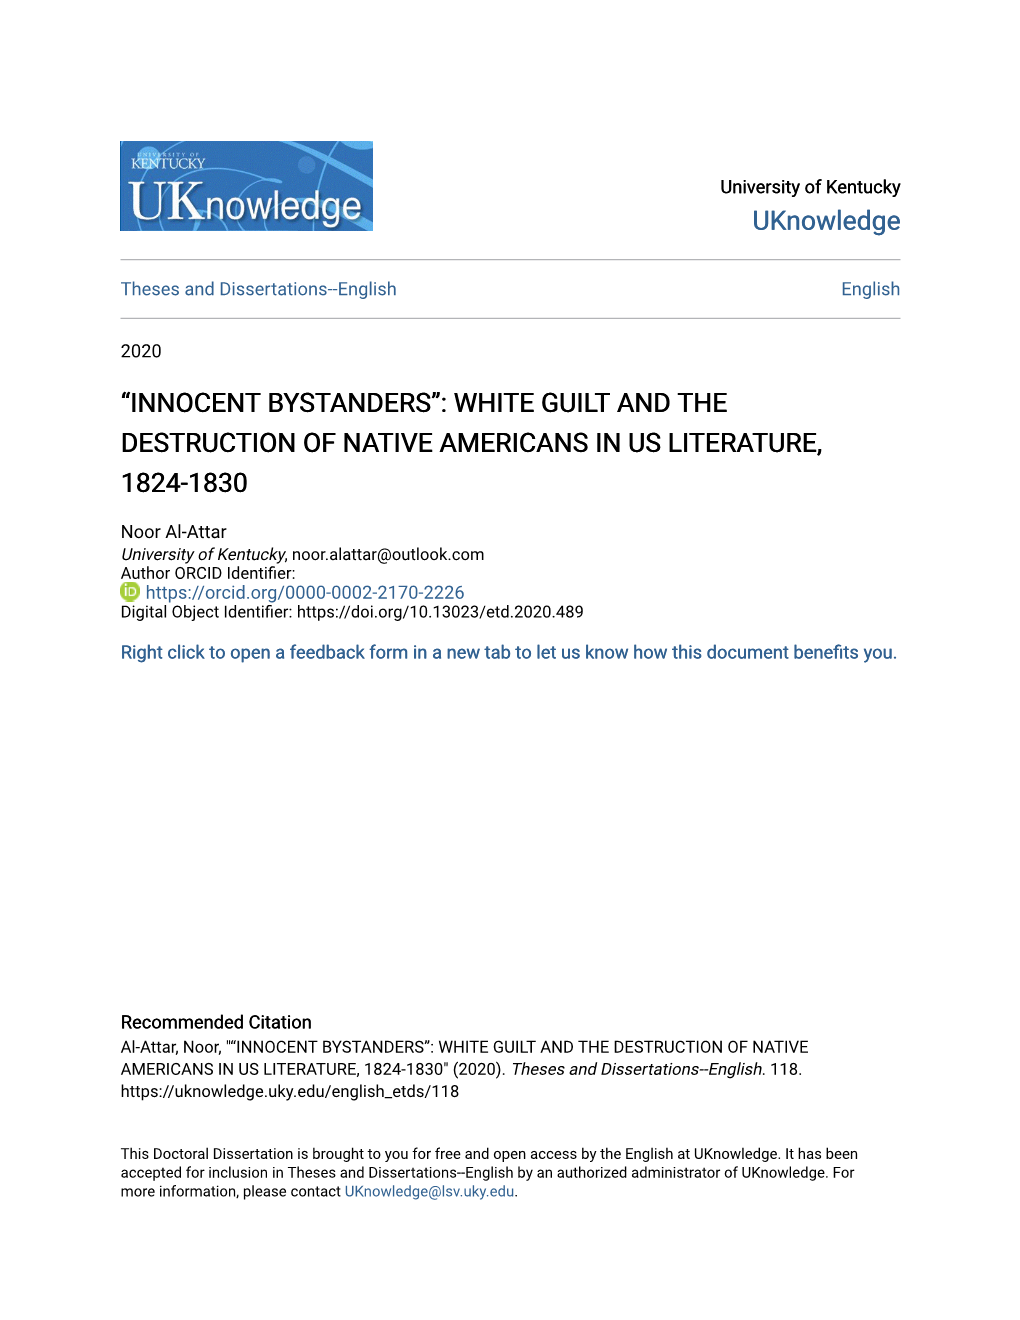 “Innocent Bystanders”: White Guilt and the Destruction of Native Americans in Us Literature, 1824-1830